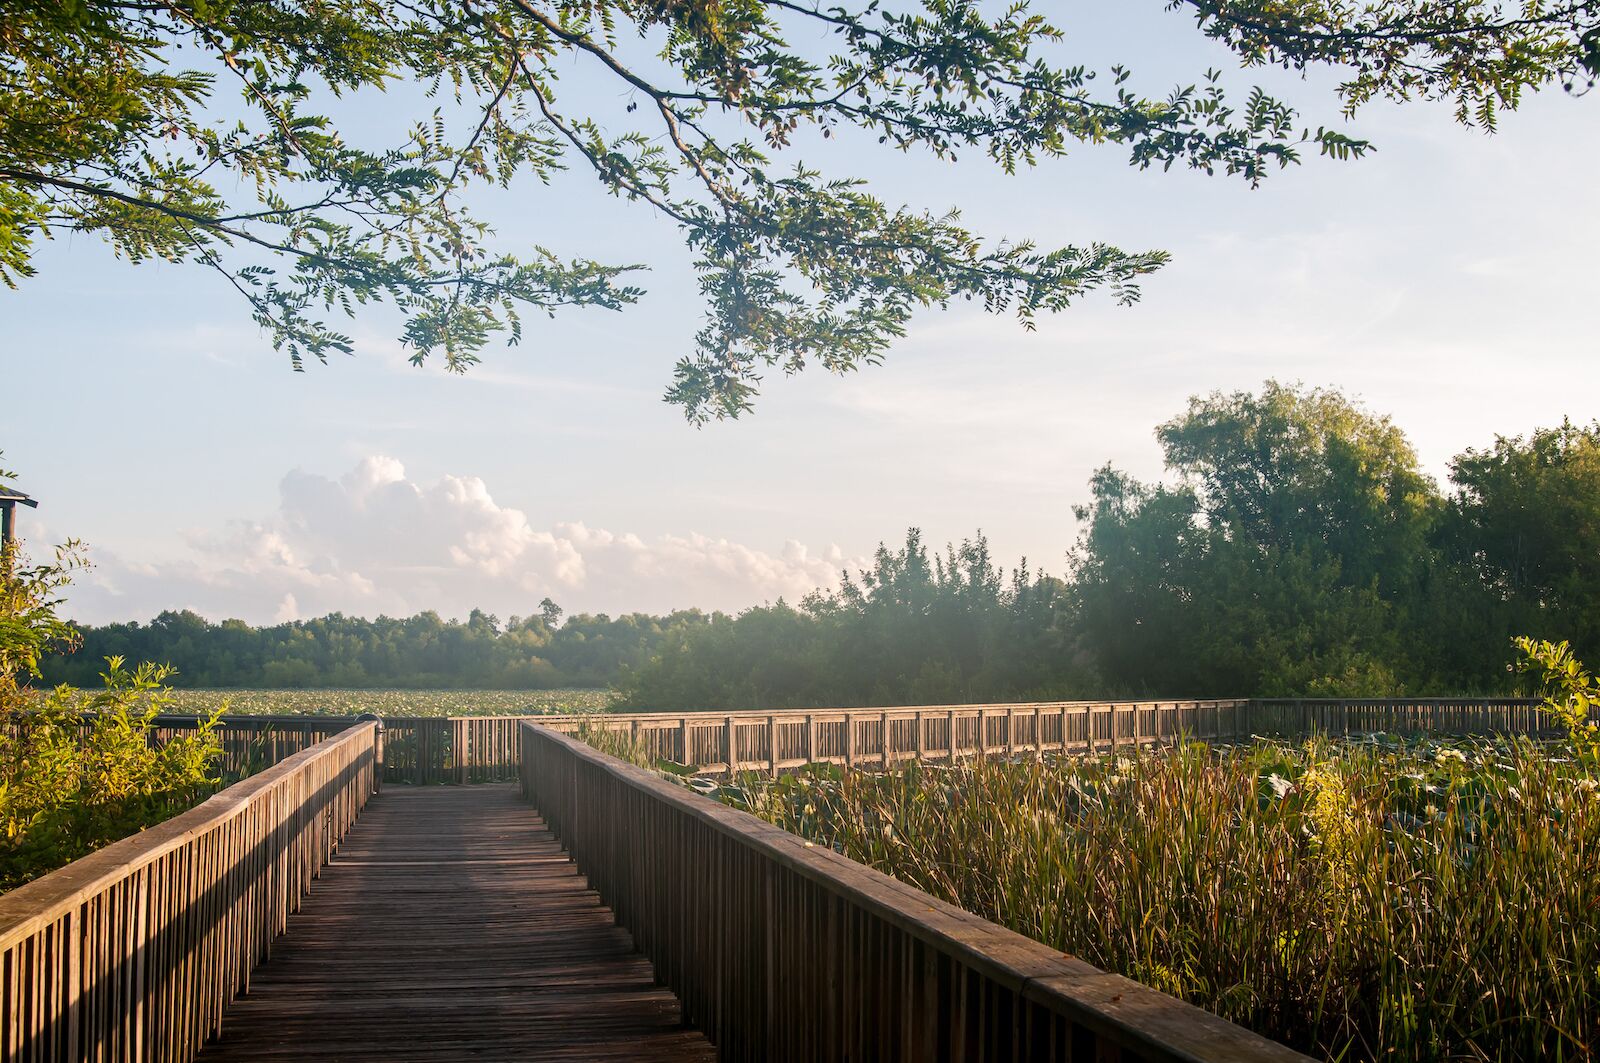 Cullinan Park, Sugarland, Texas near Houston. Humid summer morning in a southern park. Golden sunrise coming up over the swamp filled with lily pads. Wooden boardwalk stretching out into the plants.